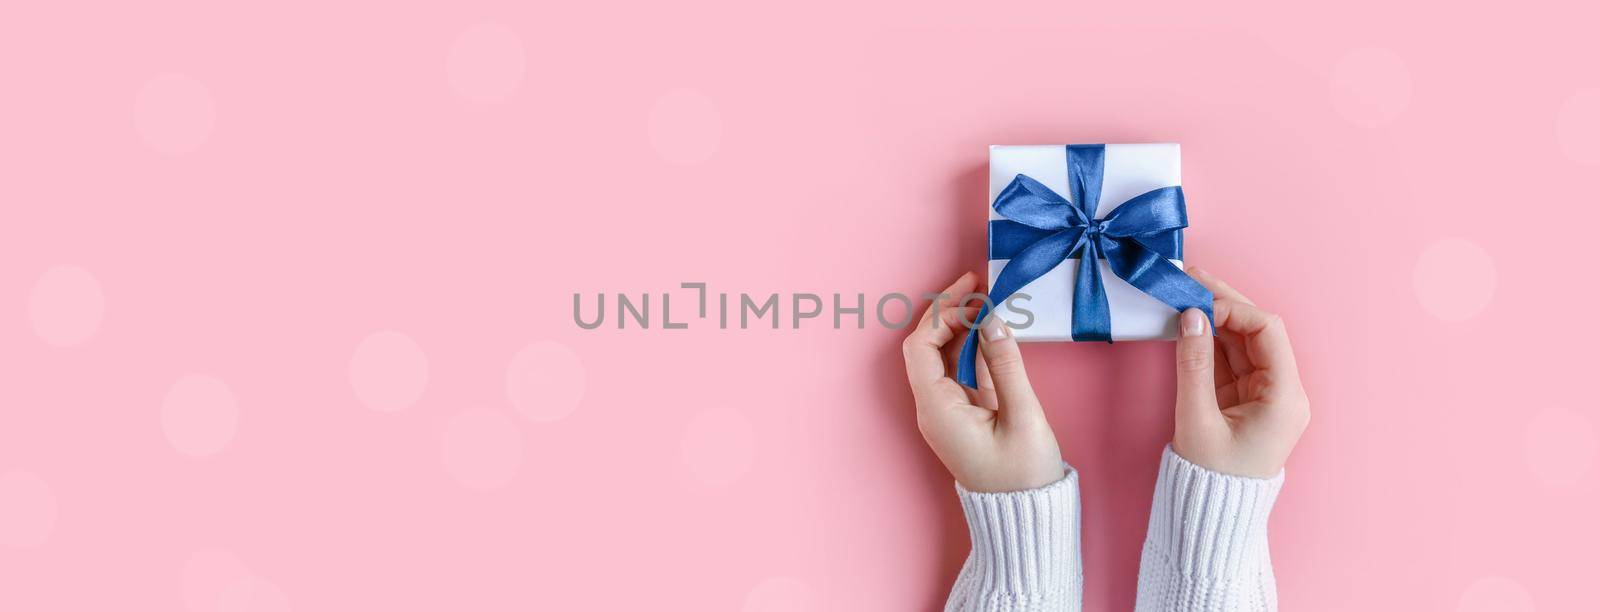 Banner of Female Hands in sweater holding gift in white wrapping paper on pink background. St. Valentines Day, love, tenderness, friendship, Birthday, Christmas concept. Festive wallpaper. Color 2022